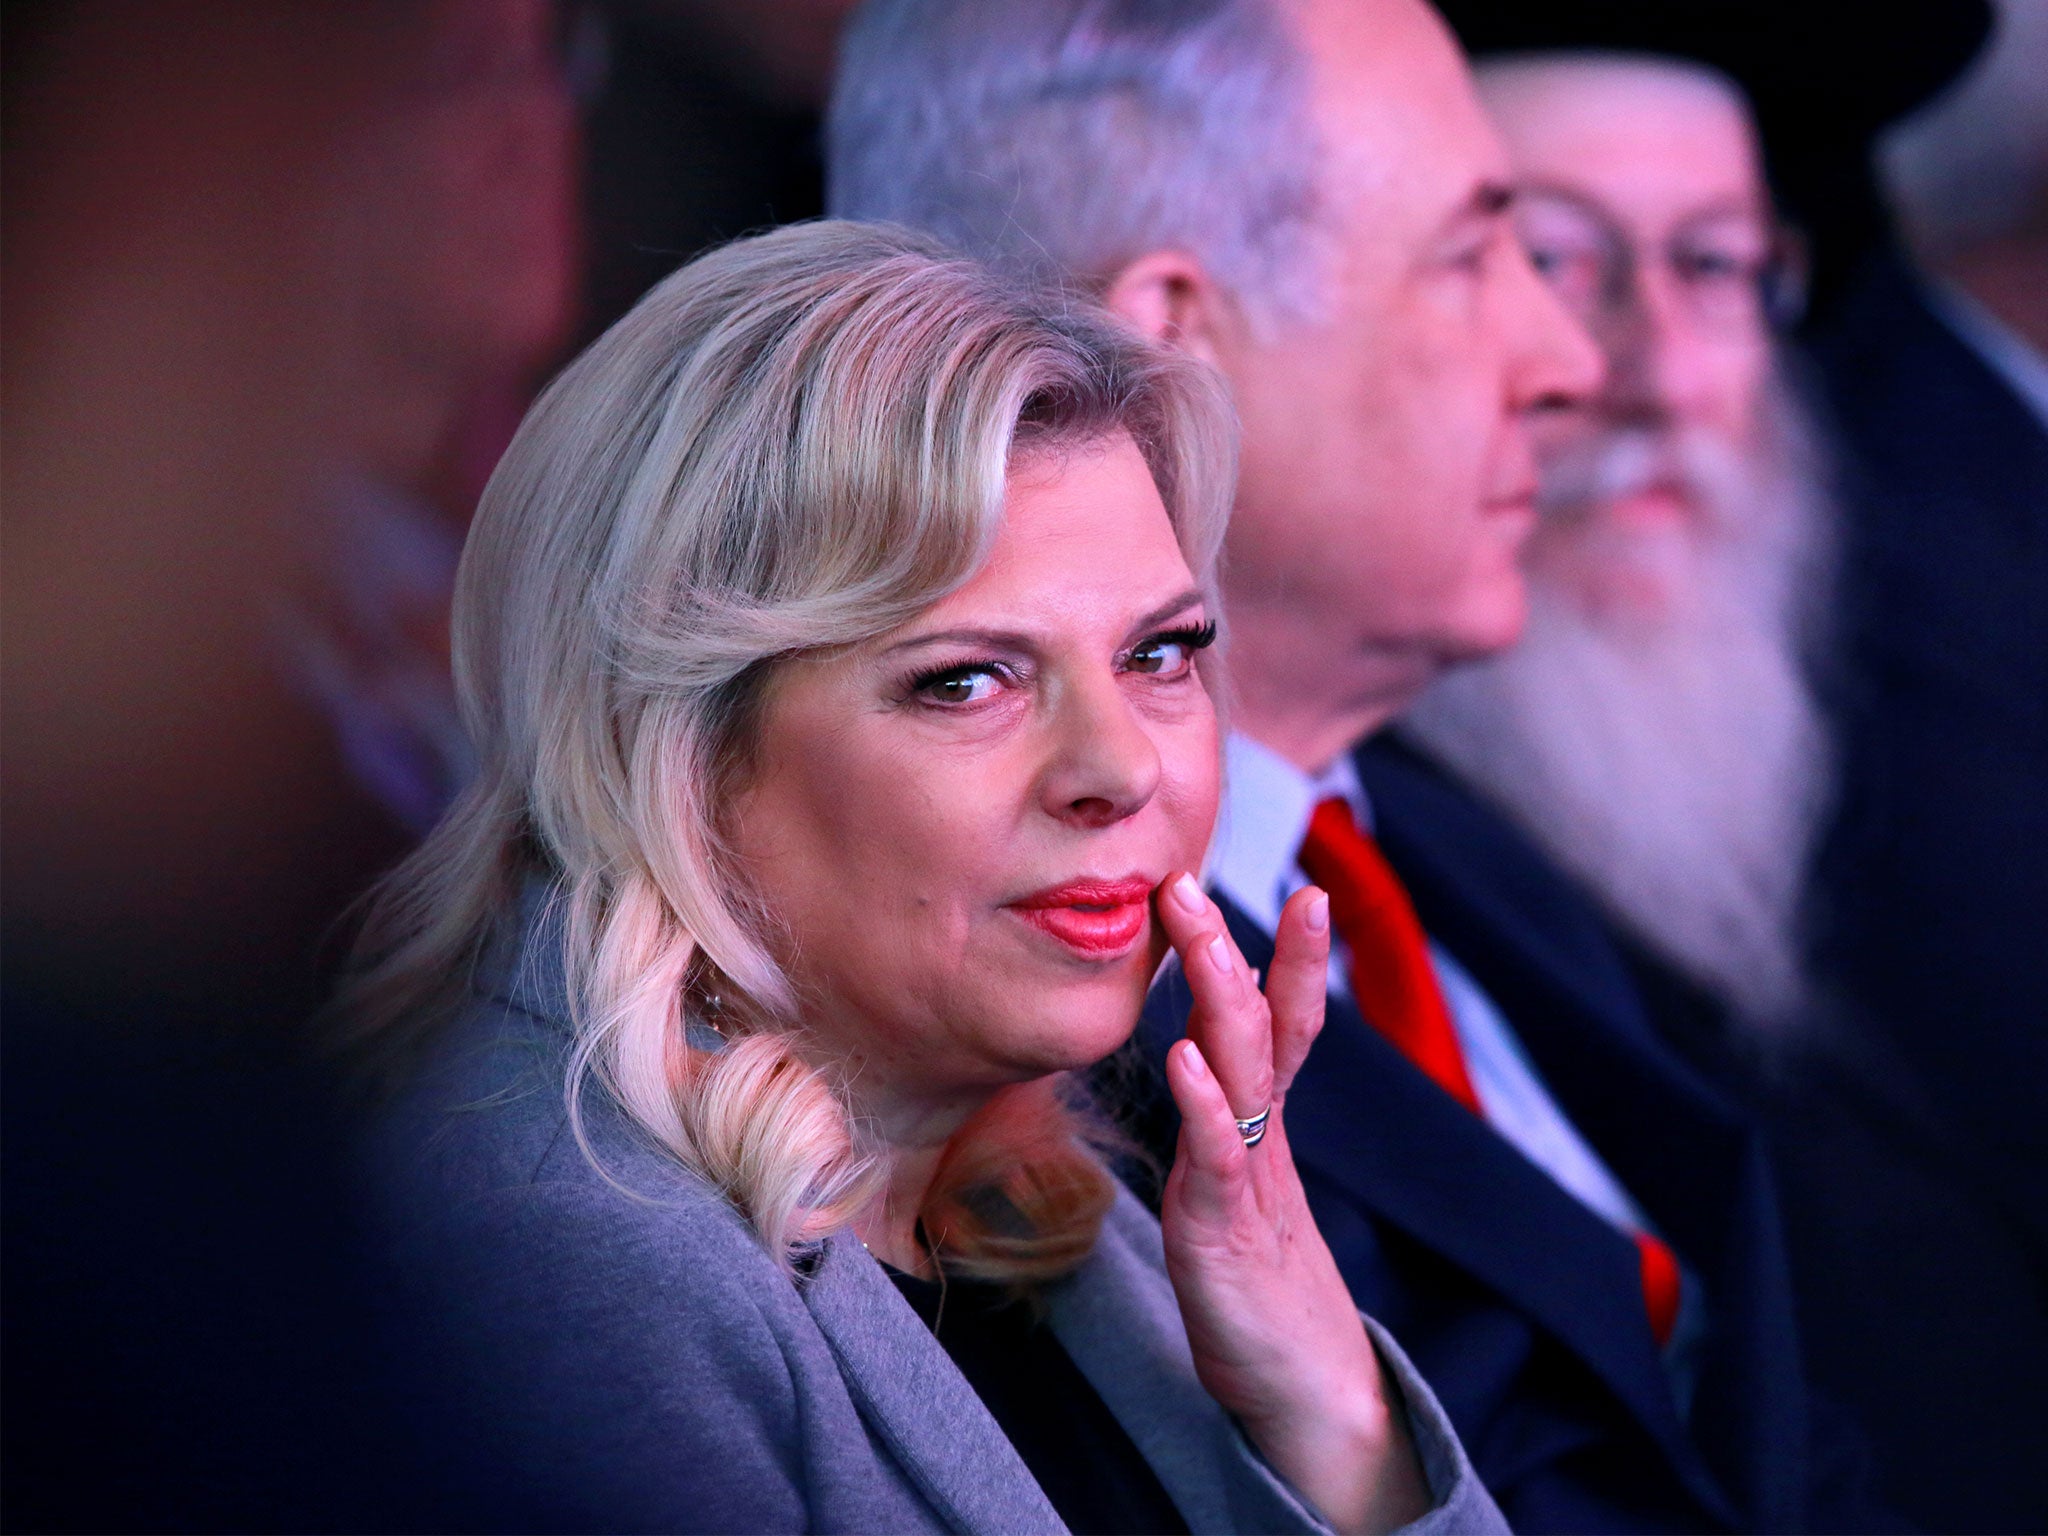 Ms Netanyahu has been indicted on fraud charges